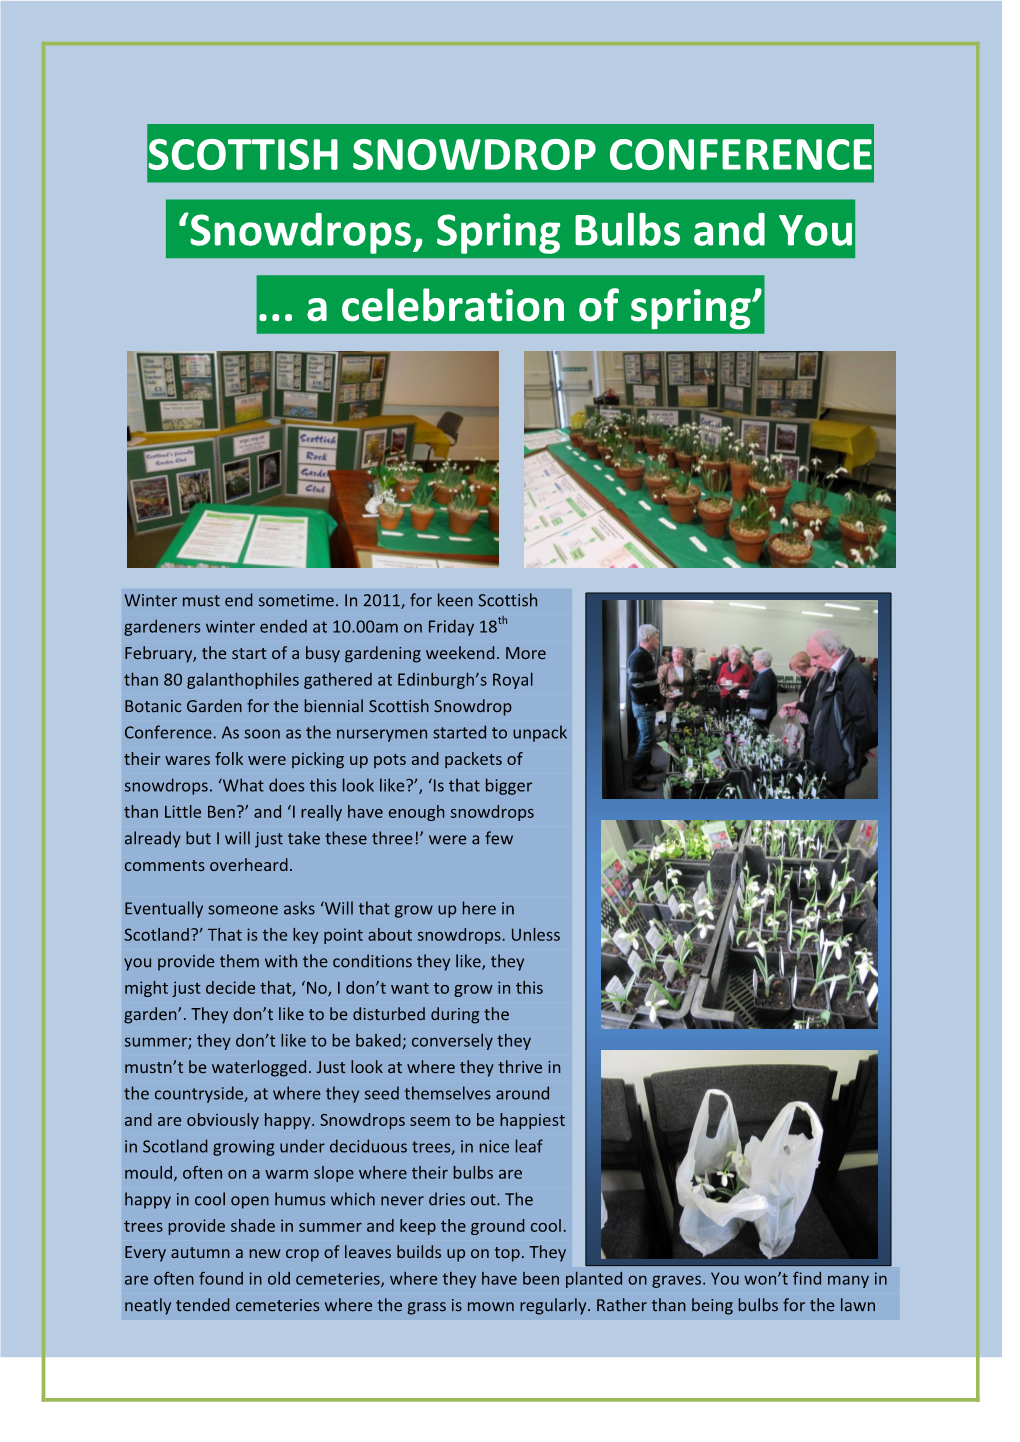 SCOTTISH SNOWDROP CONFERENCE 'Snowdrops, Spring Bulbs and You ... a Celebration of Spring'